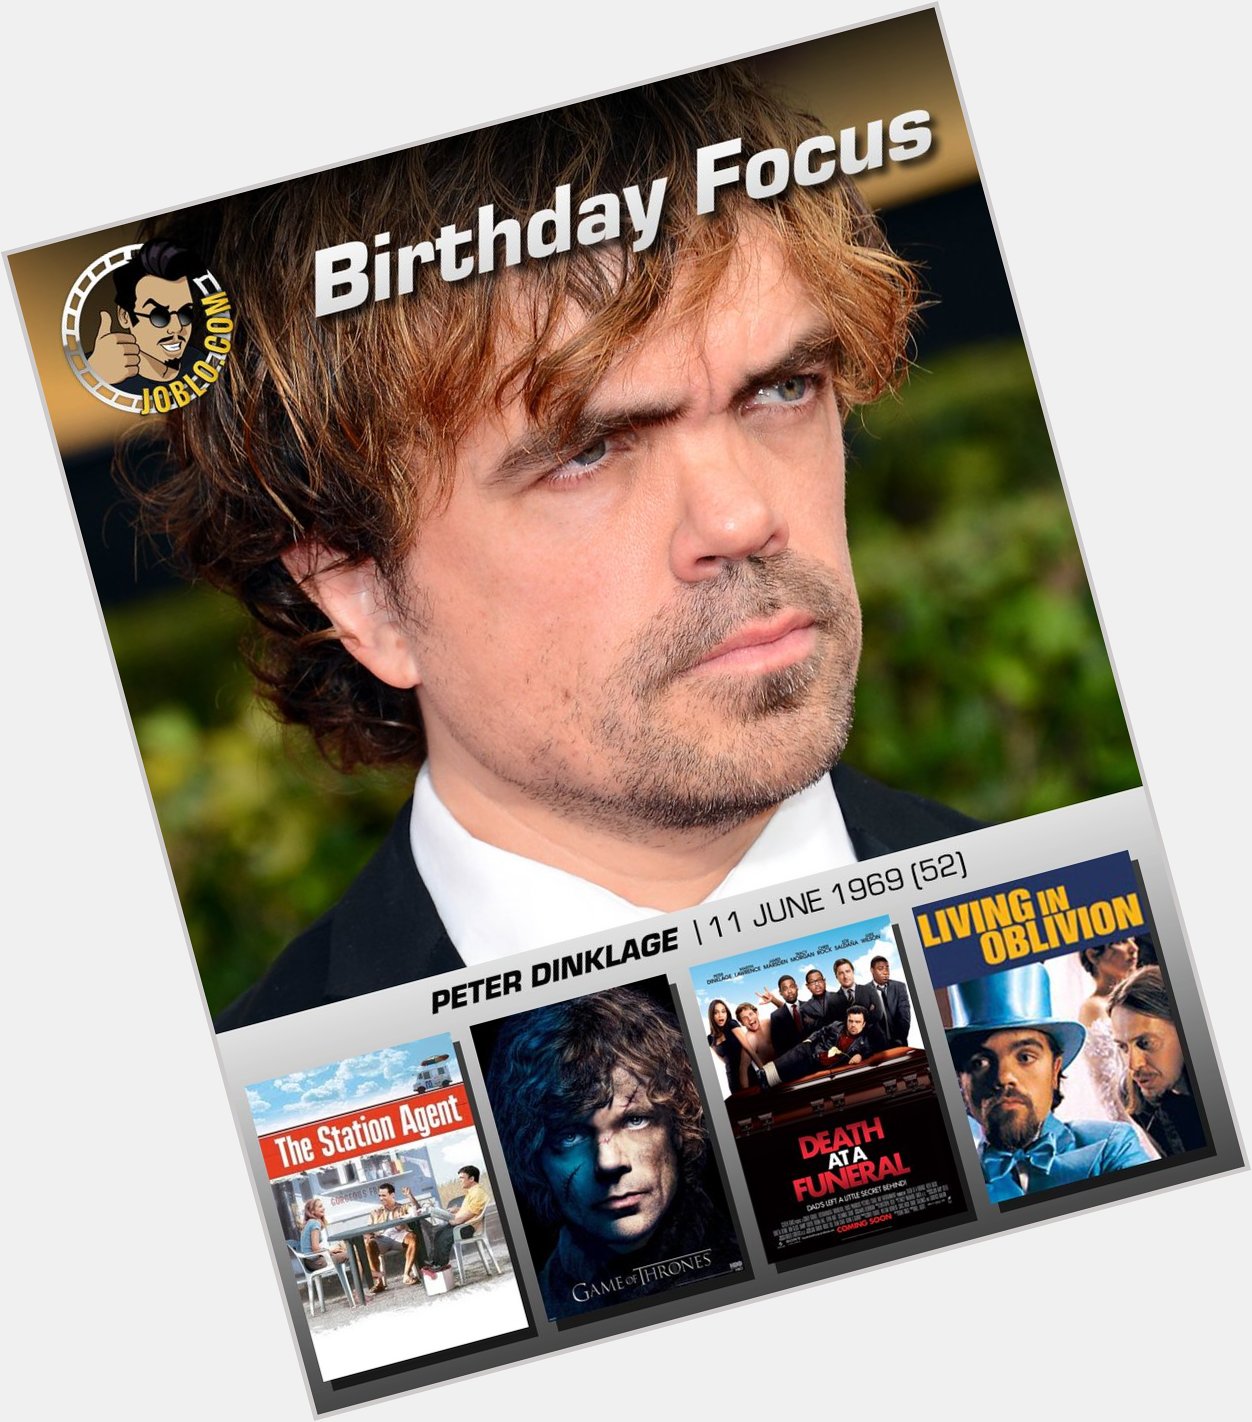 Wishing Peter Dinklage a very happy 52nd birthday! 